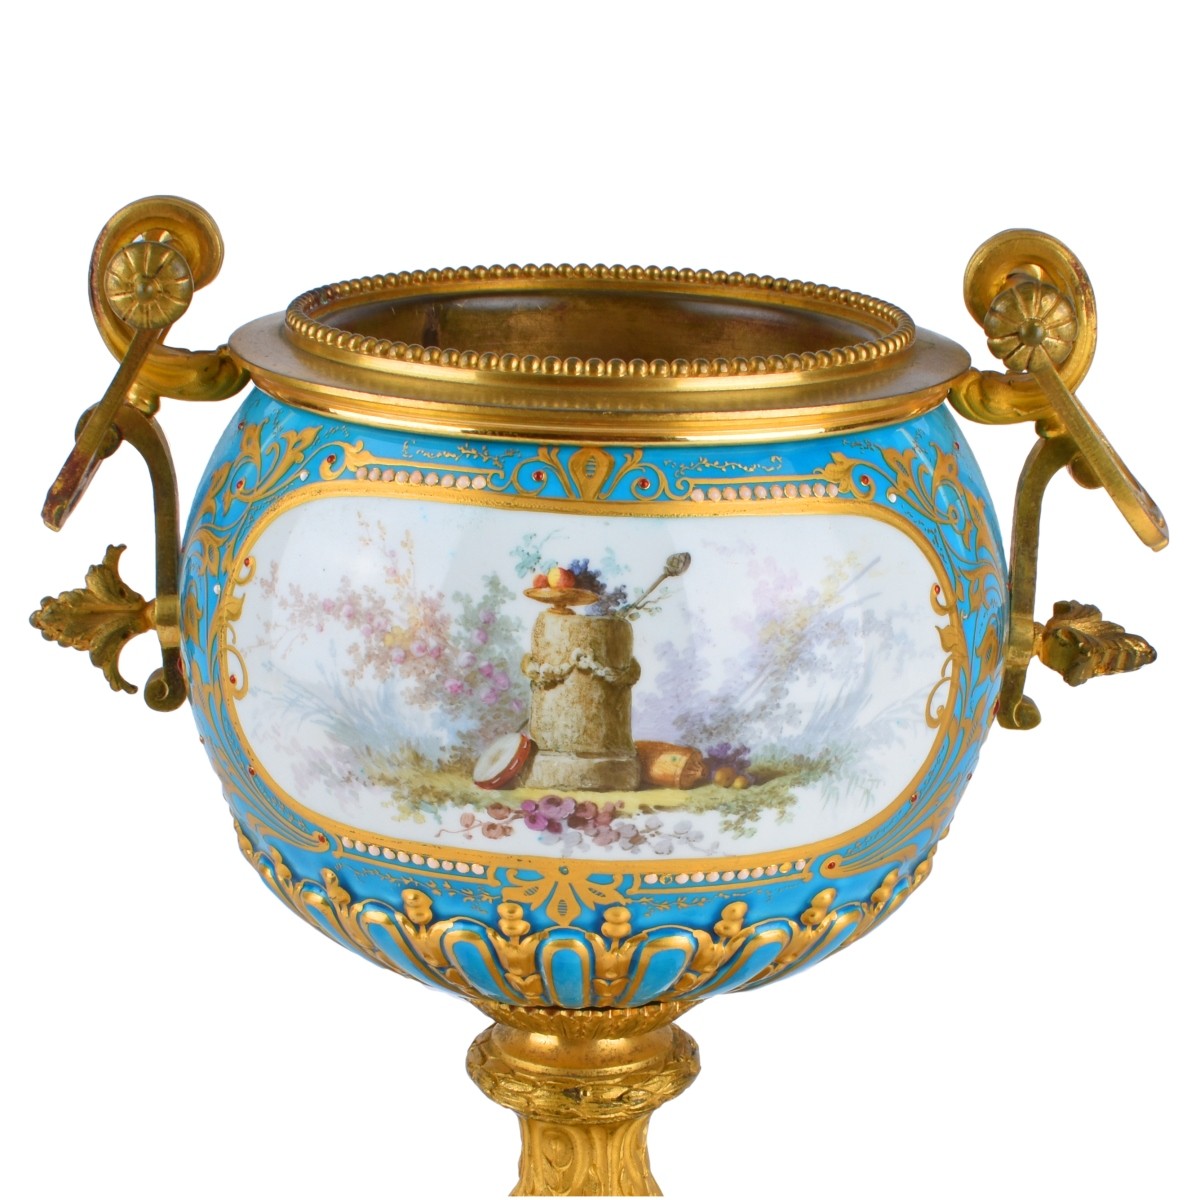 A Sevres syle Porcelain and Bronze Mounted Bowl